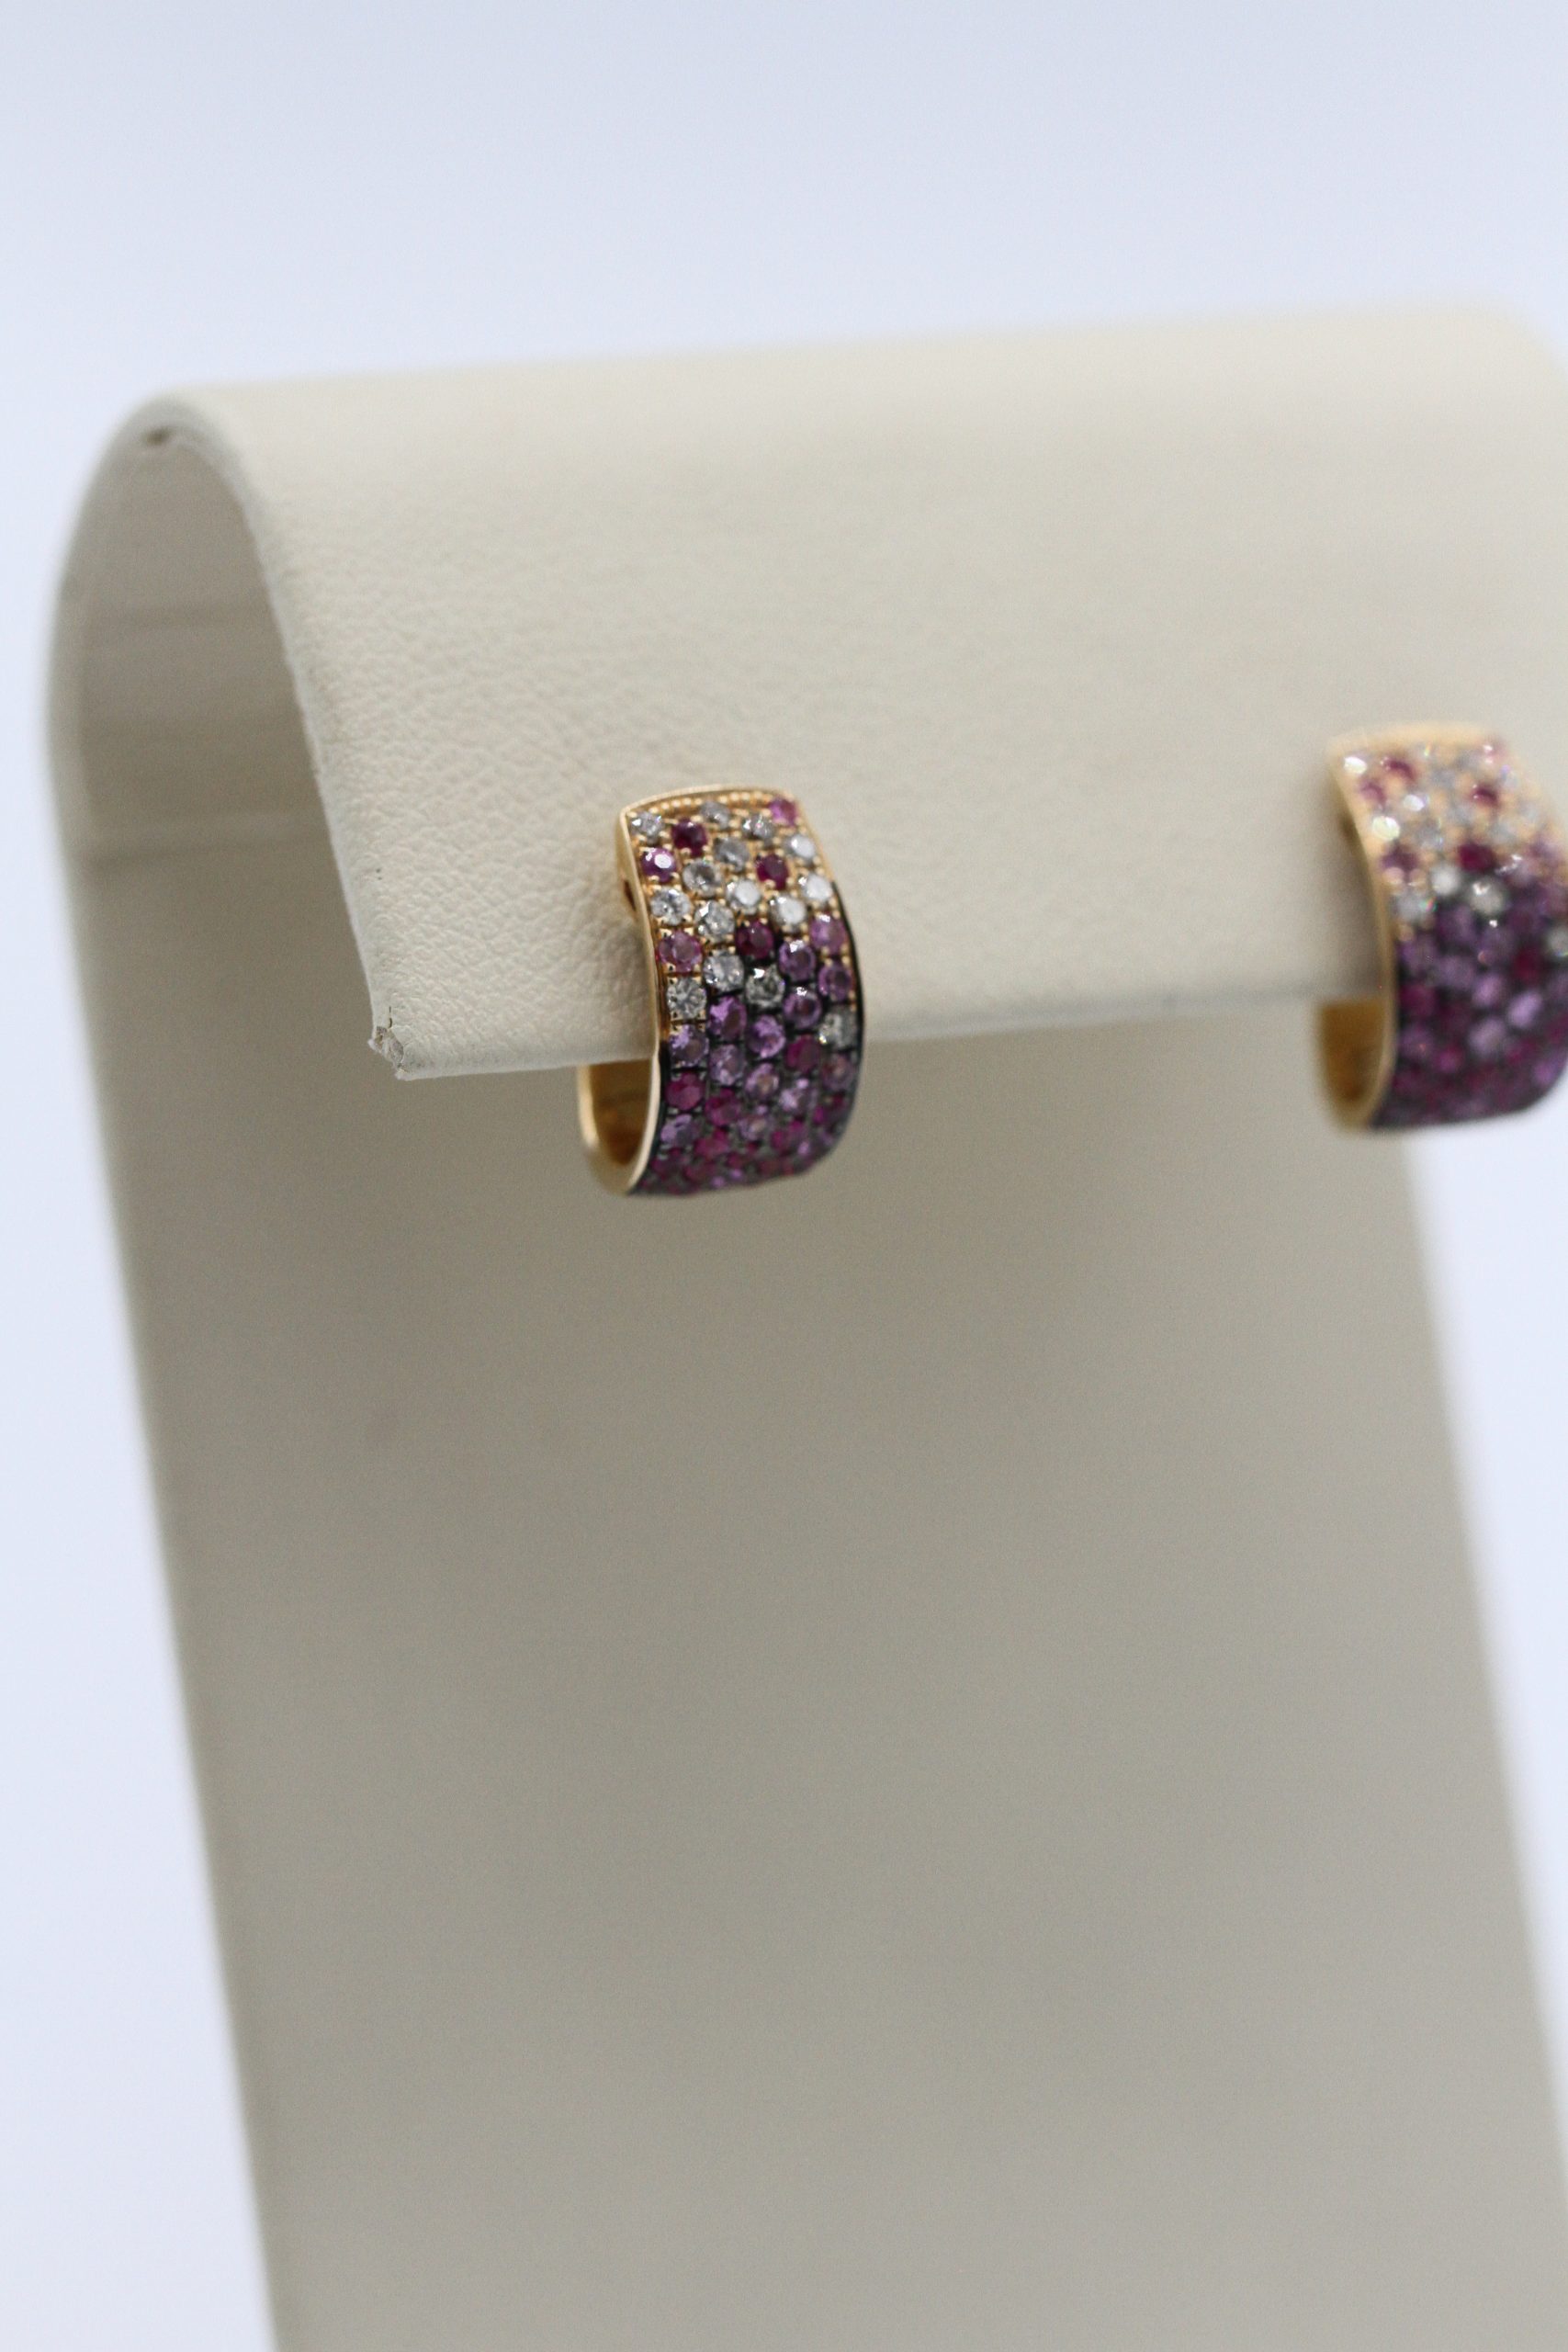 Two earrings with purple and white stones